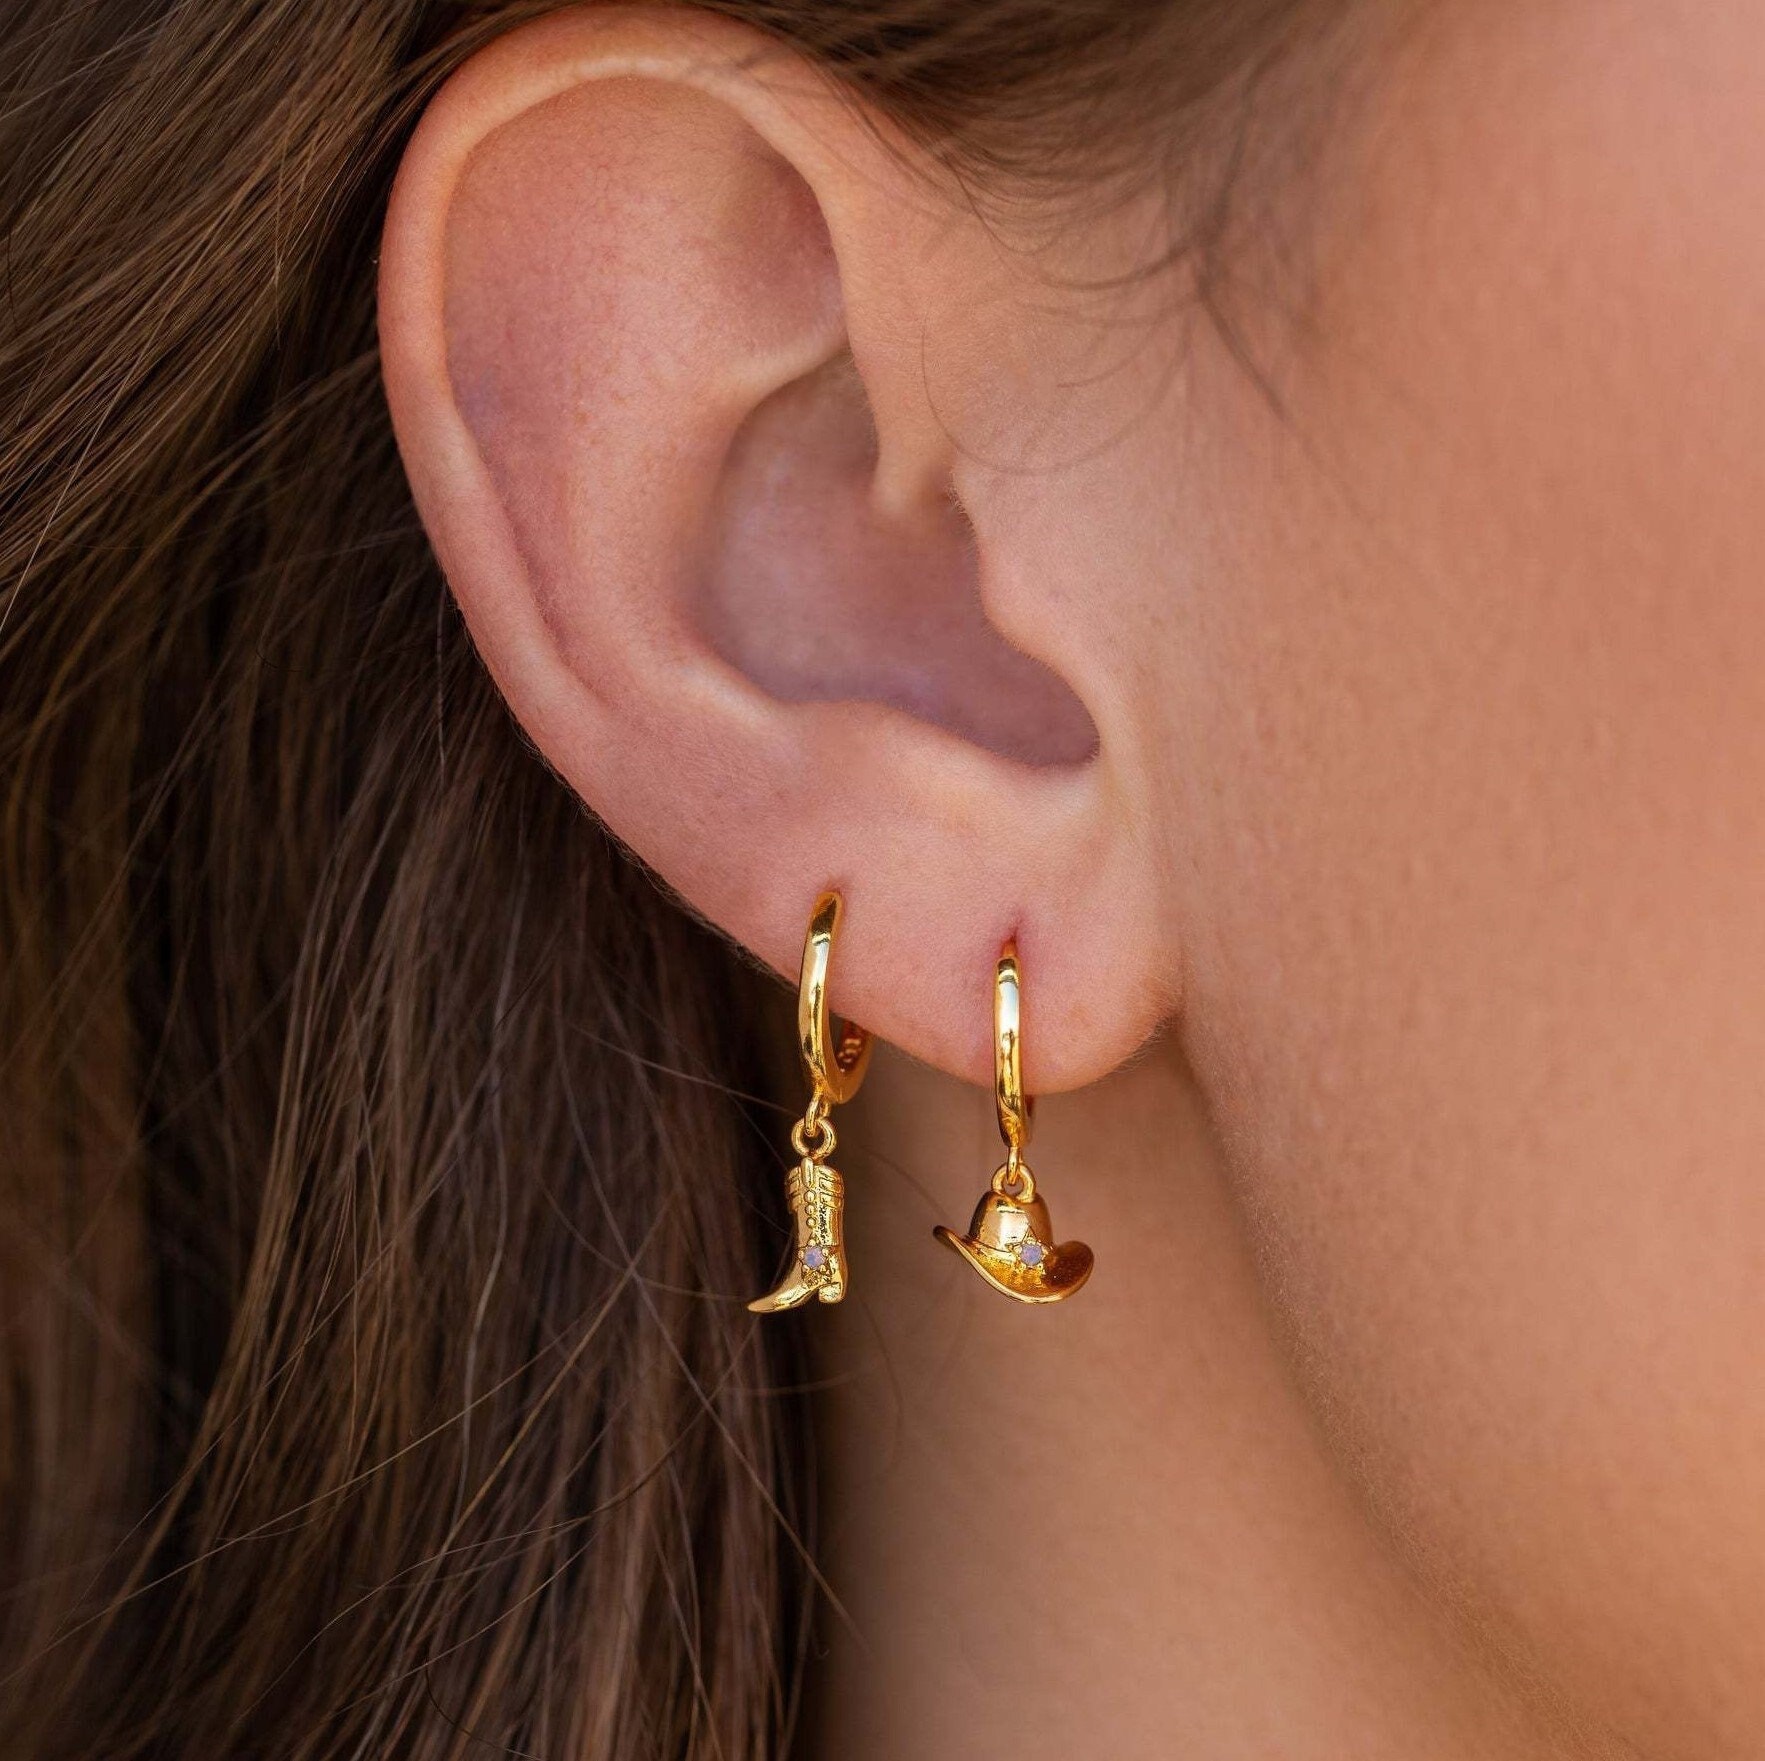 Comfortable Earrings (@comfyearrings) • Instagram photos and videos